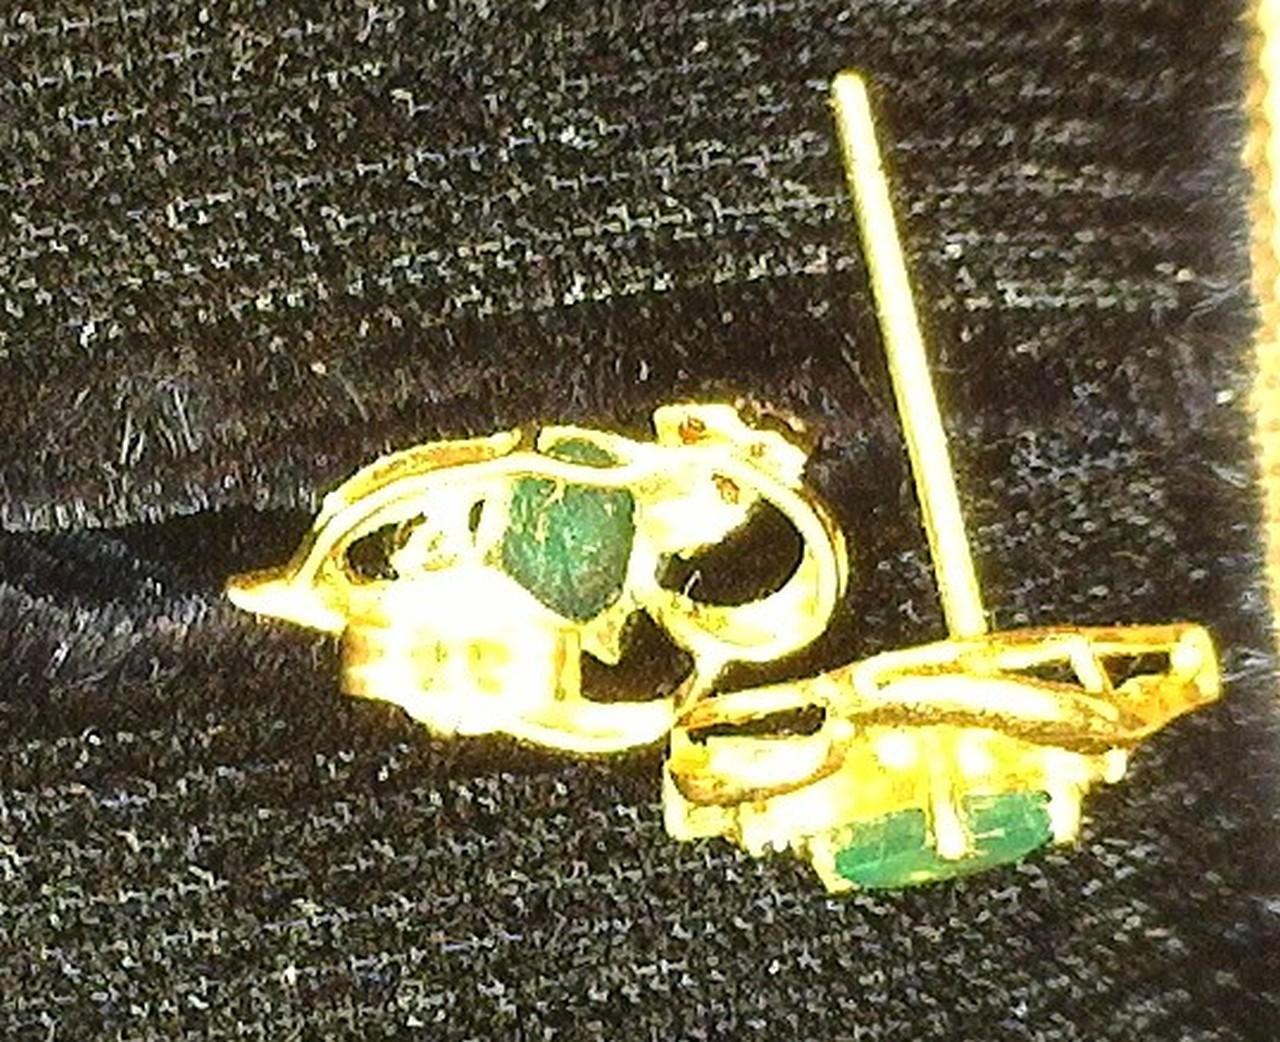 Diamond and Emerald 14K Gold Earrings. One is missing the back.